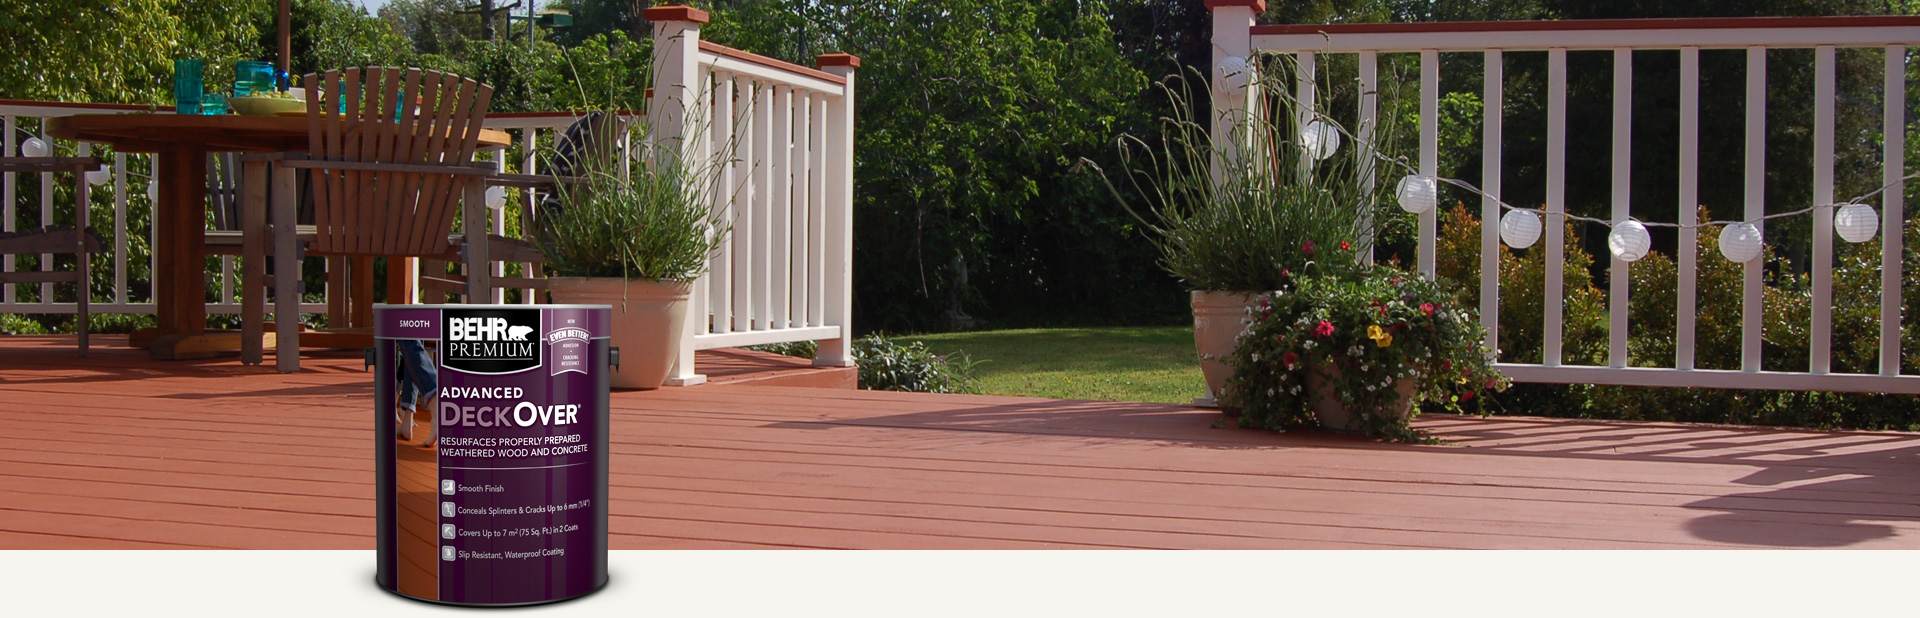 Two cans of Behr Premium Advanced DeckOver Coating with a wooden deck, product can, and brush in the background